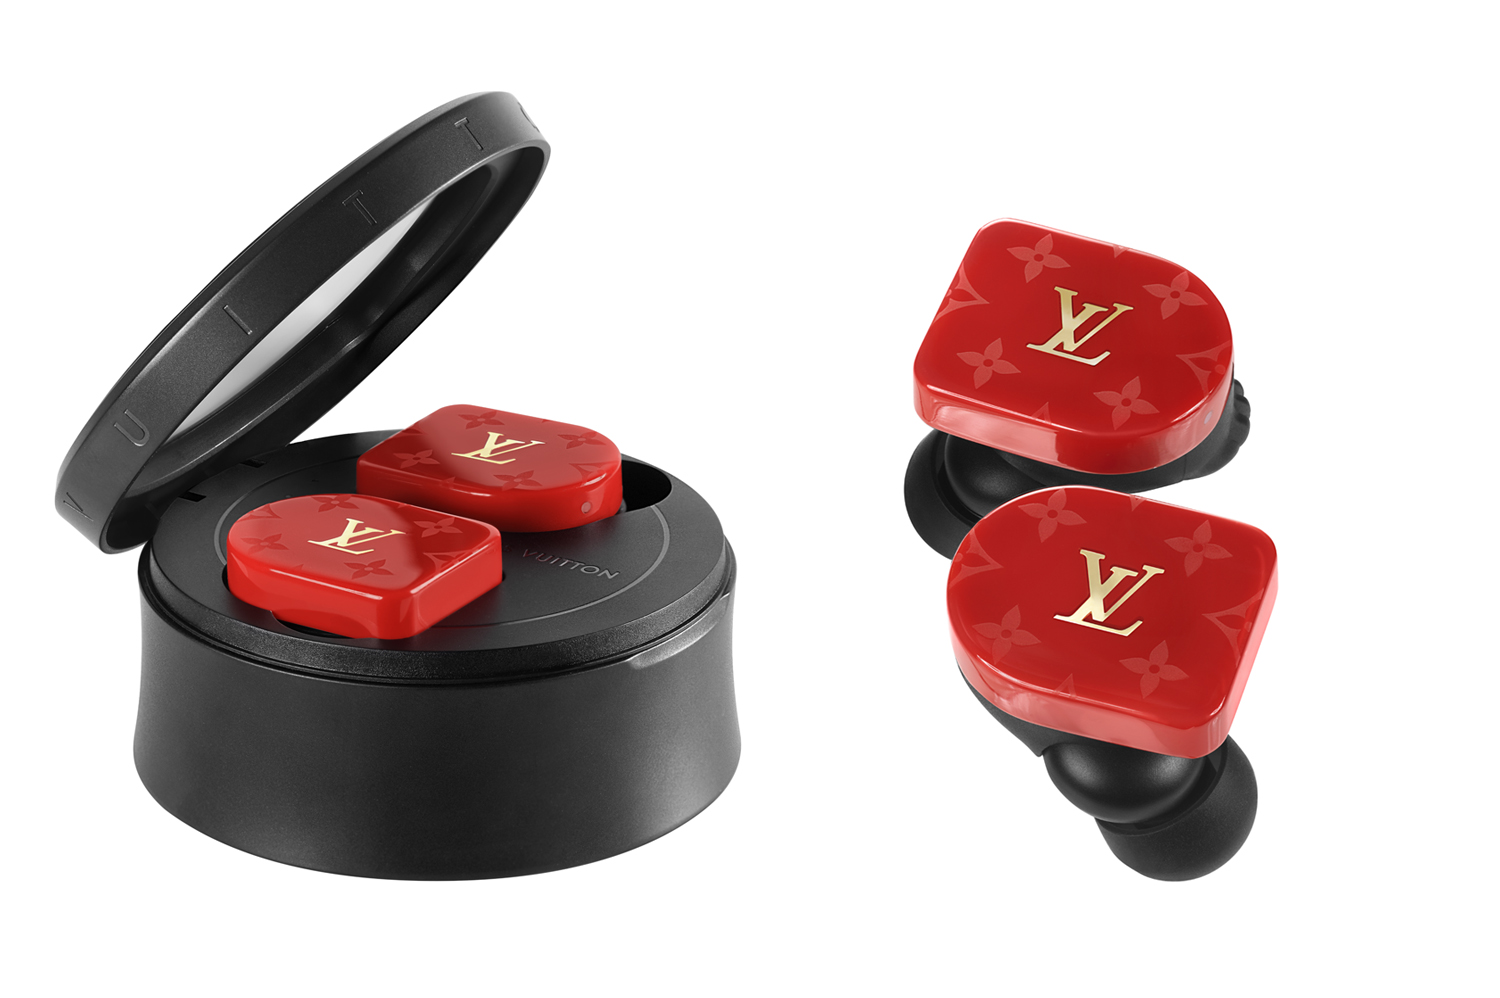 Master & Dynamic Louis Vuitton Horizon: Product image of the earbuds in red with cylindrical charging case on left side of image.